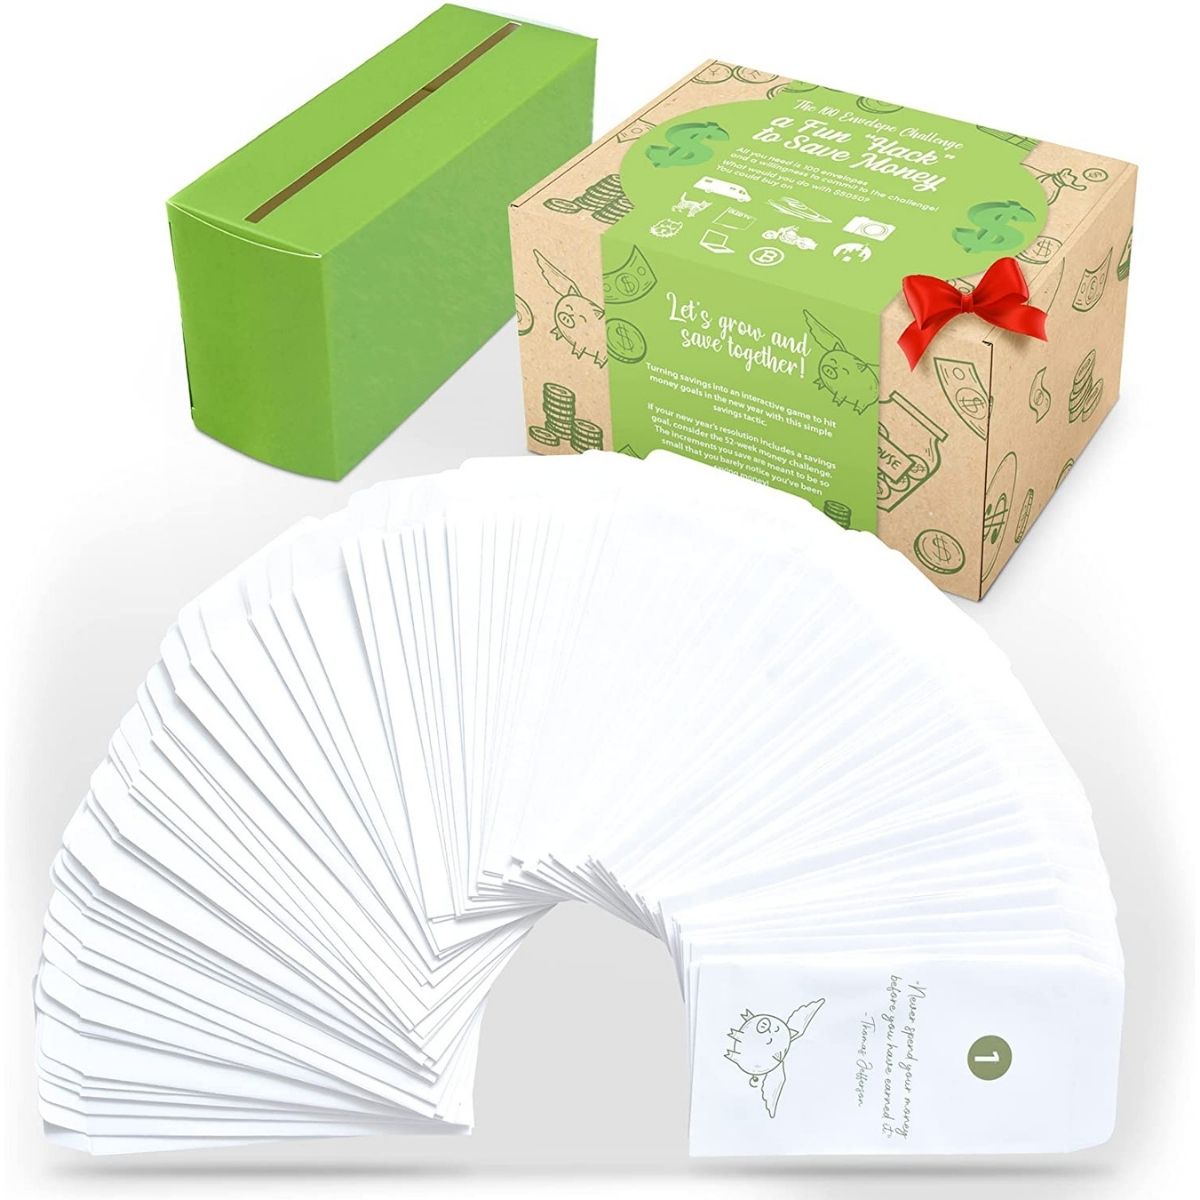 This Innovative Money Envelope Saving System Makes Budgeting Simple - Get Yours